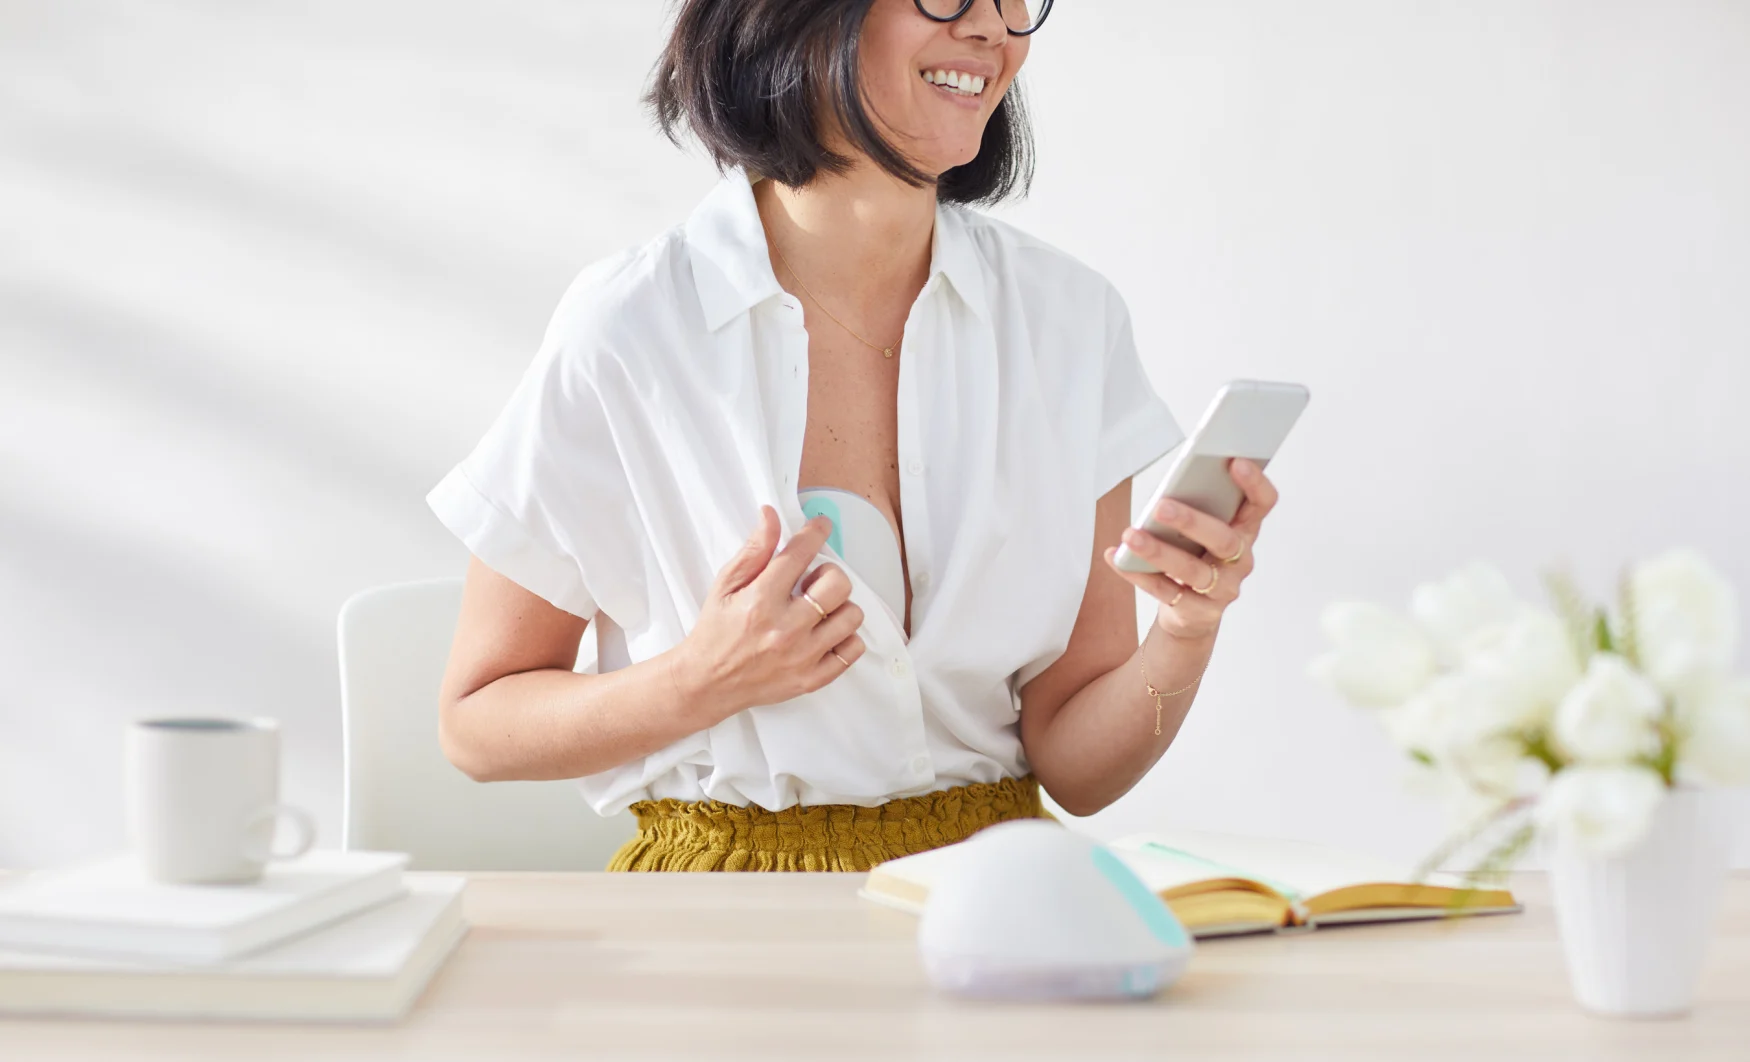 Willow Reveals Third Generation Breast Pump Designed With New Tech Inside to Help Moms Pump their Most Milk Yet